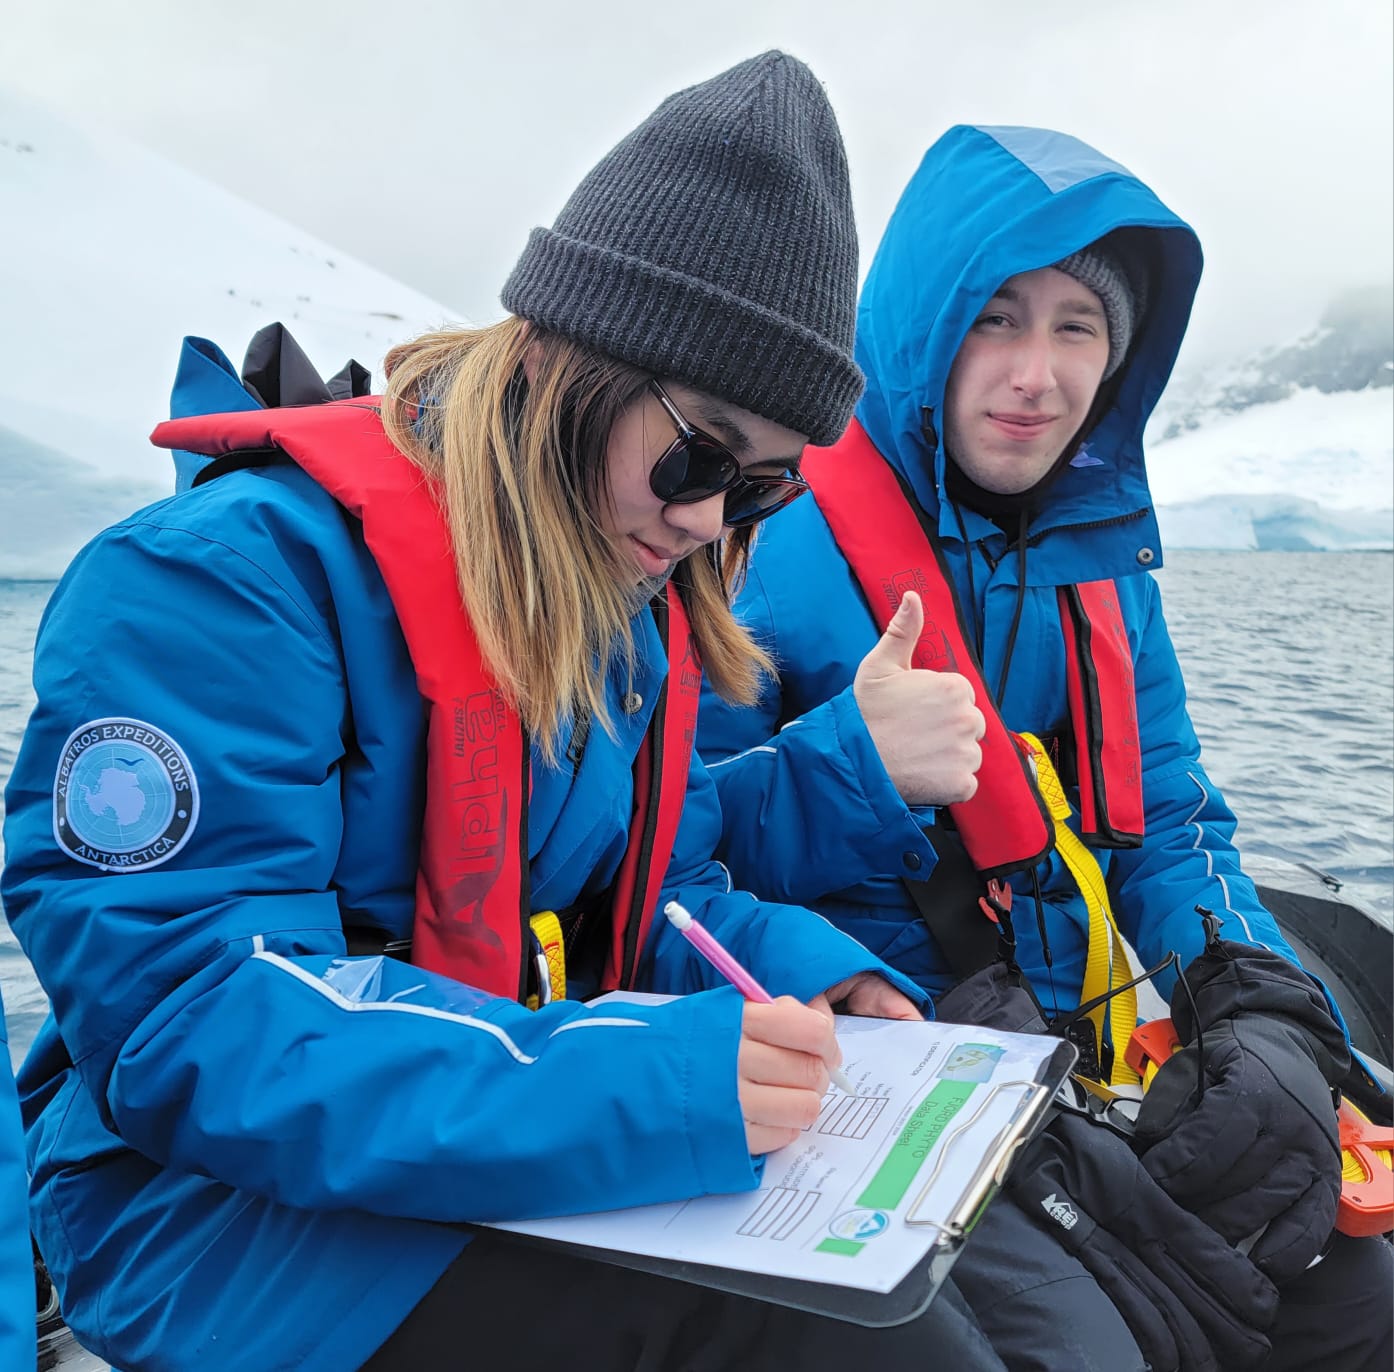 Photo of a young man and woman in blue winter jackets, red floatation vets and warm hats sitting on a boat in the Antarctic. The woman is writing